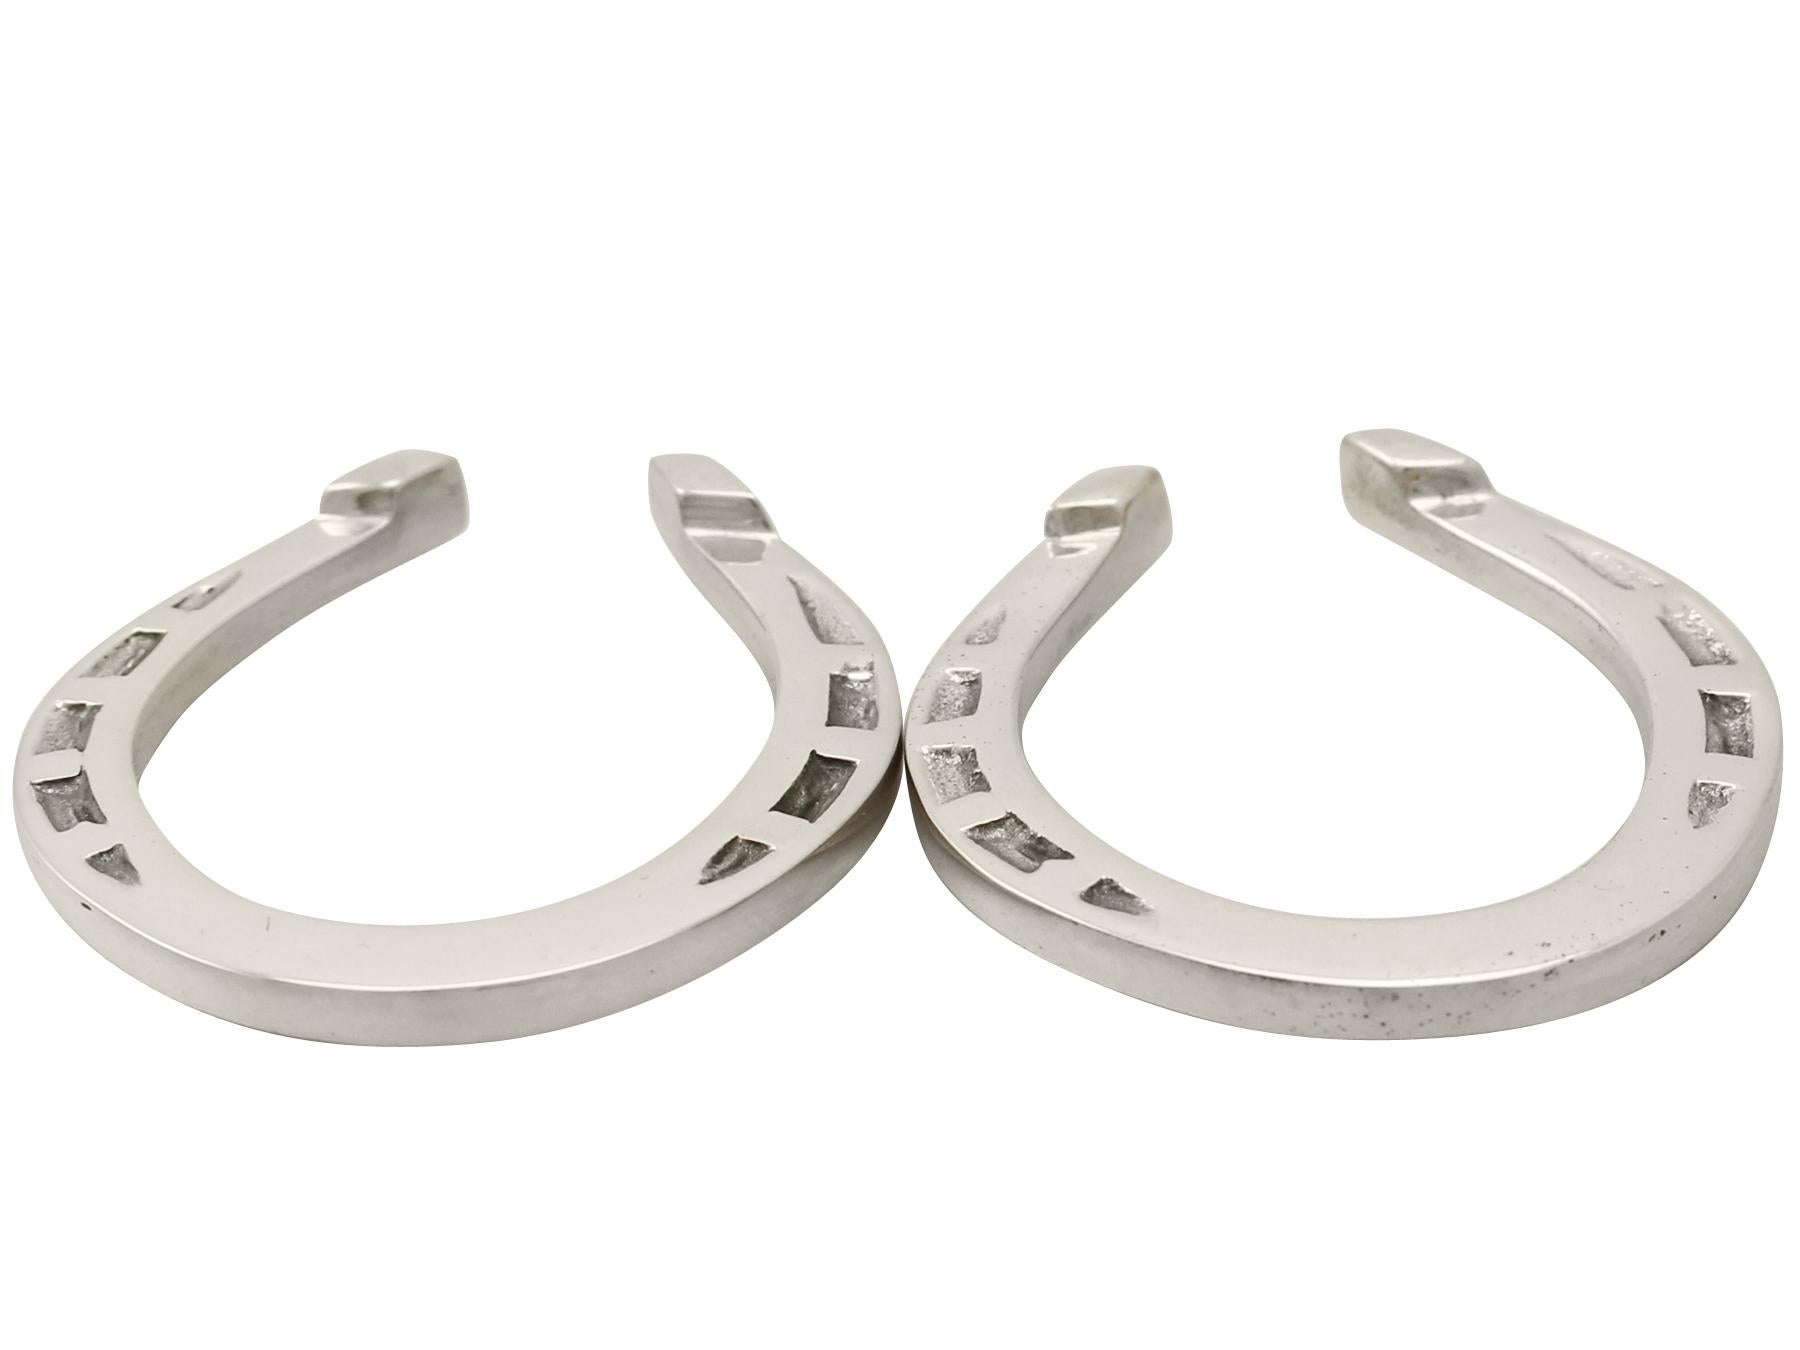 Mid-20th Century Boxed English Sterling Silver Napkin Rings in the Form of Horseshoes